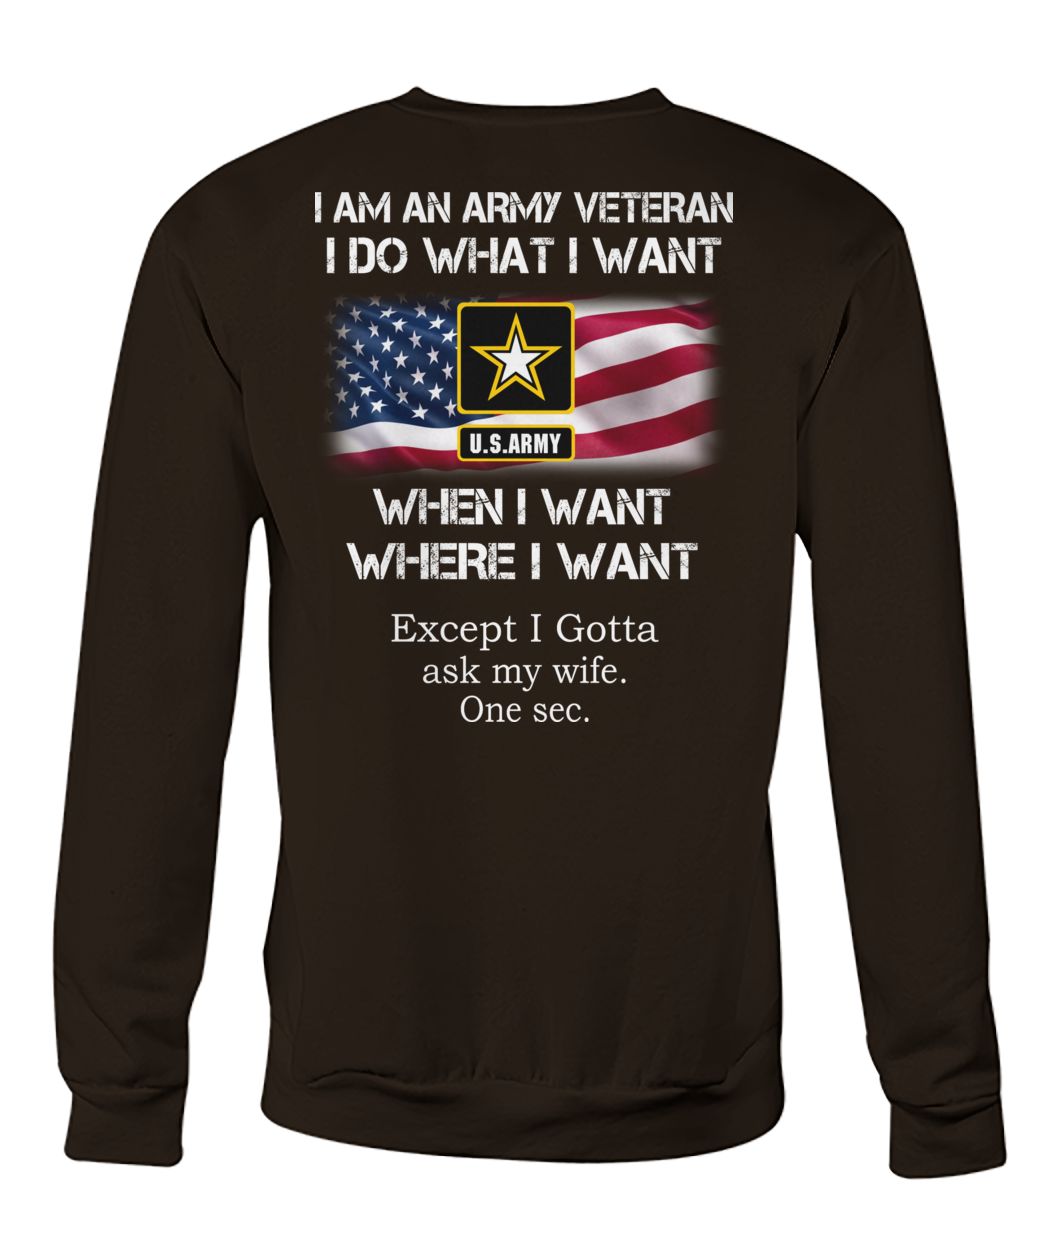 I am an army veteran I do what I want when I want where I want except I gotta ask my wife crew neck sweatshirt